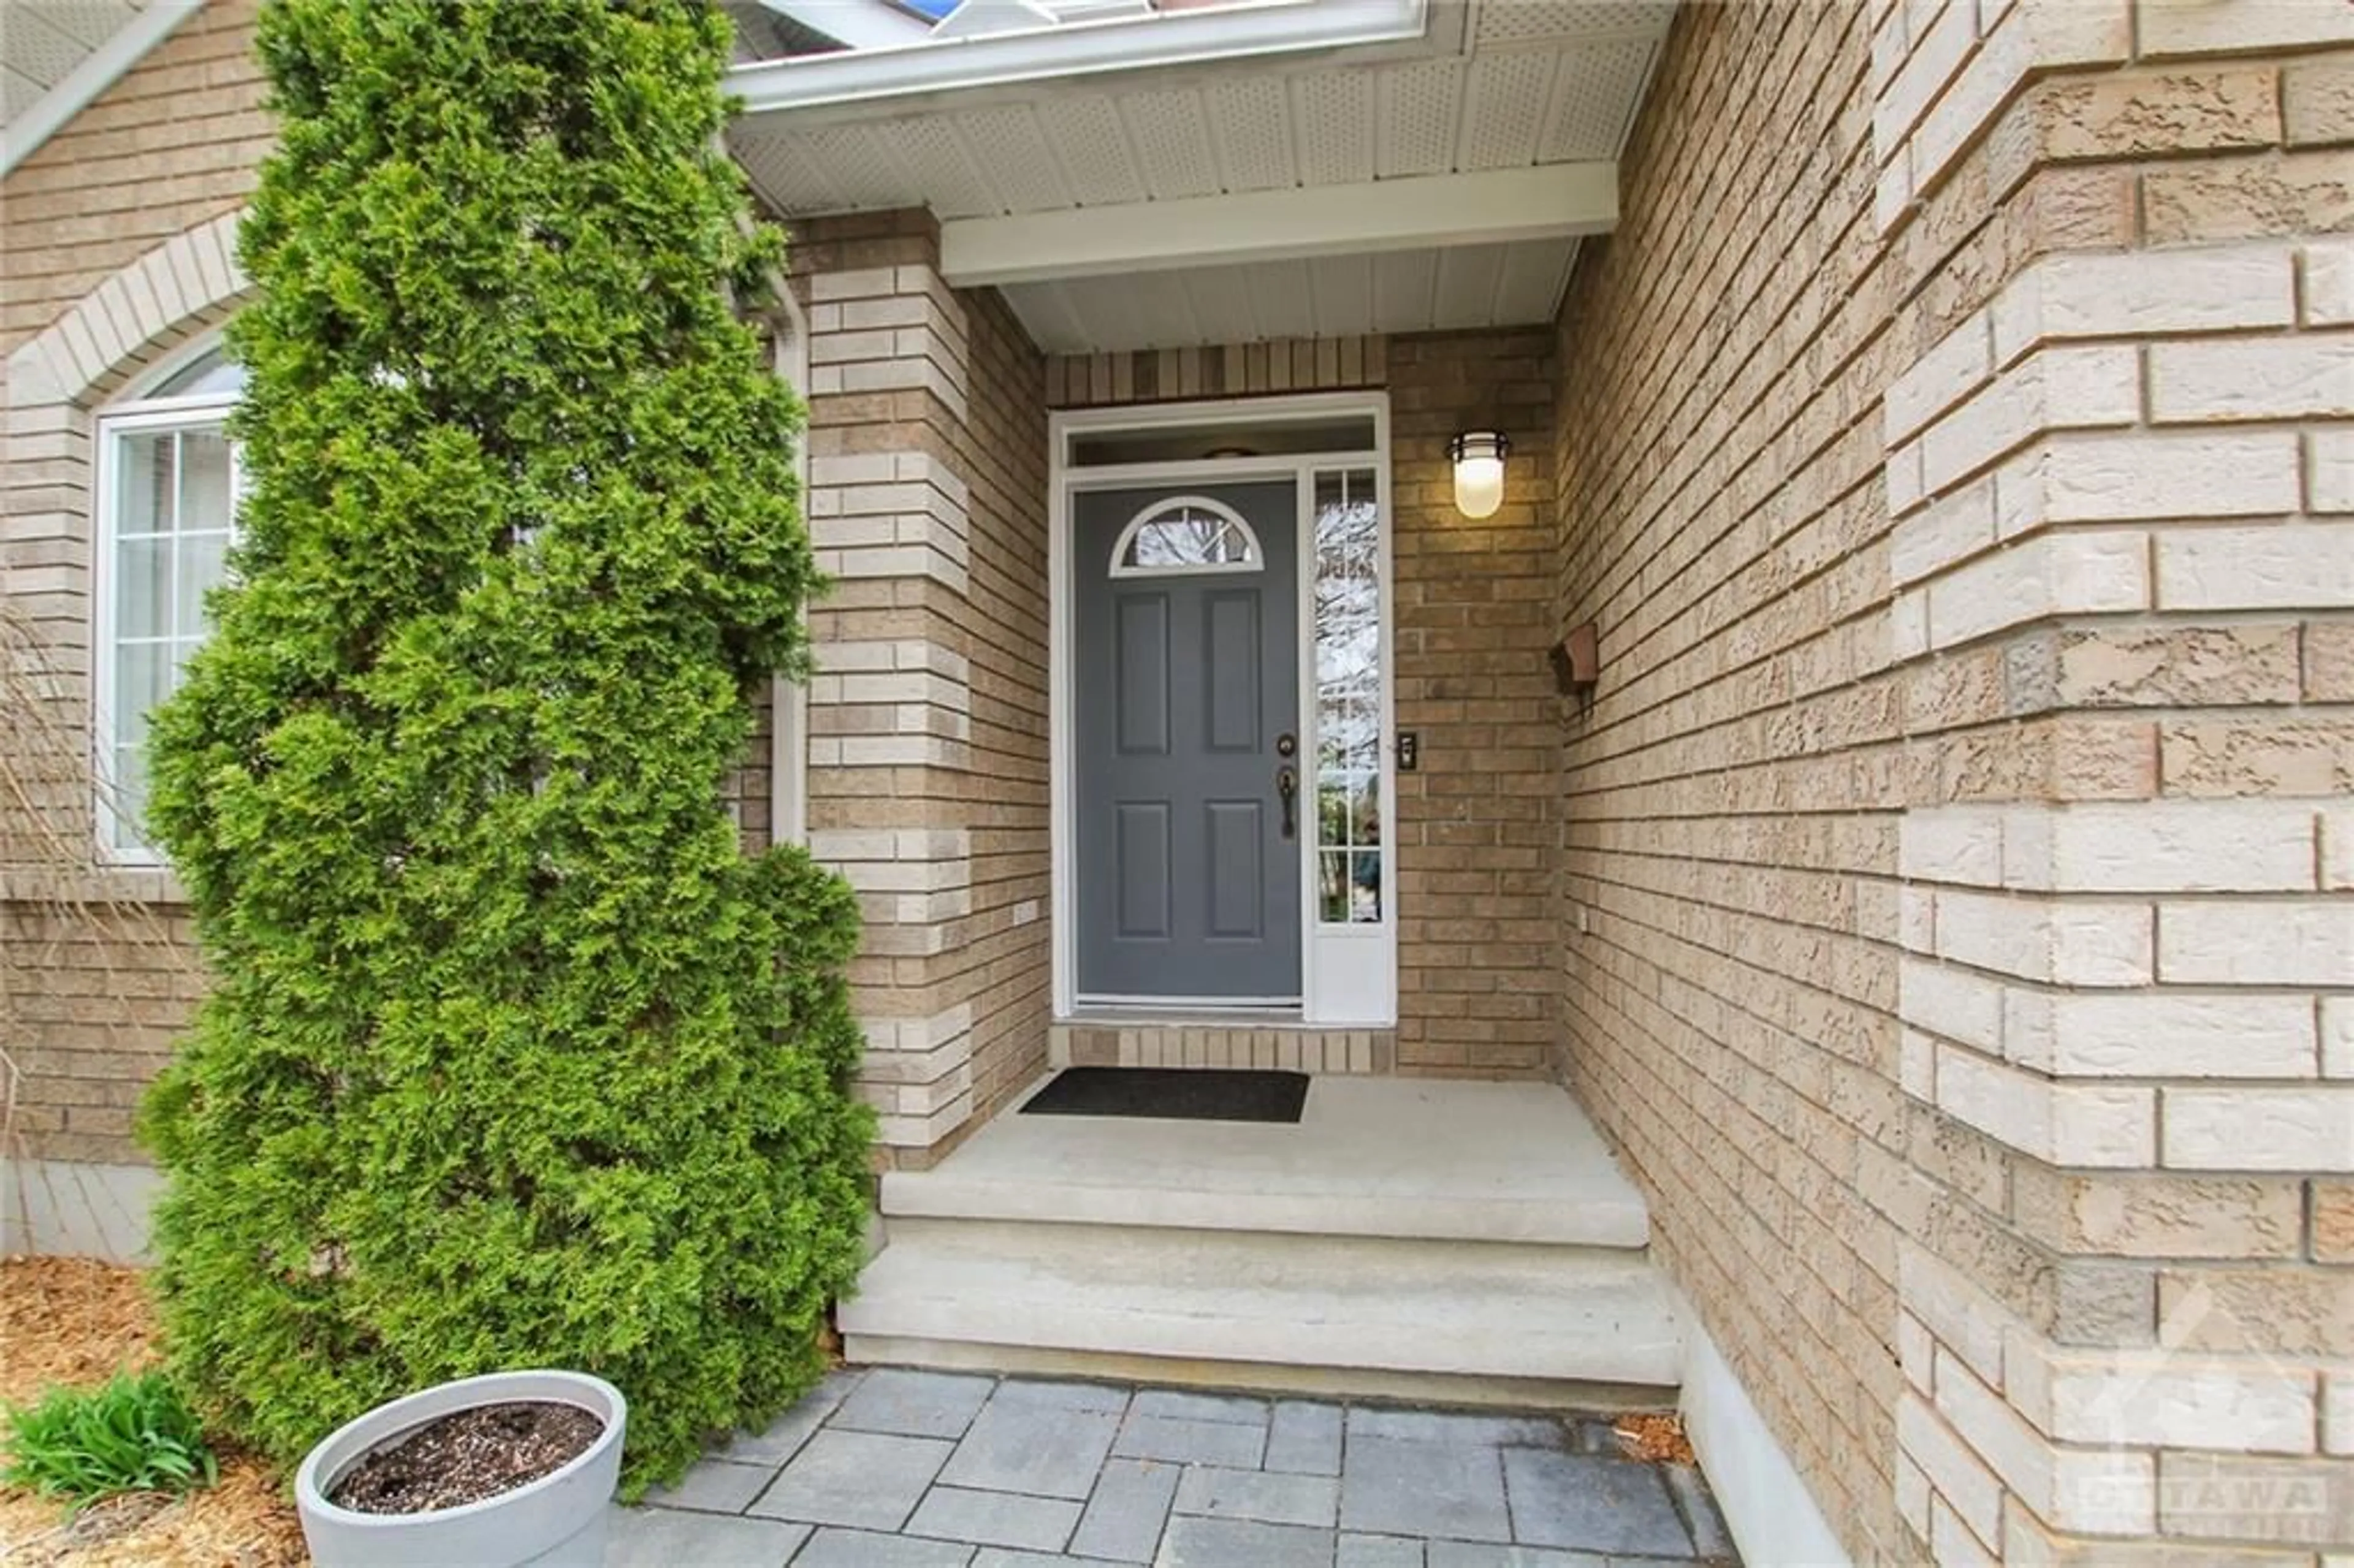 Home with brick exterior material for 4 PELEE St, Kanata Ontario K2M 2R4